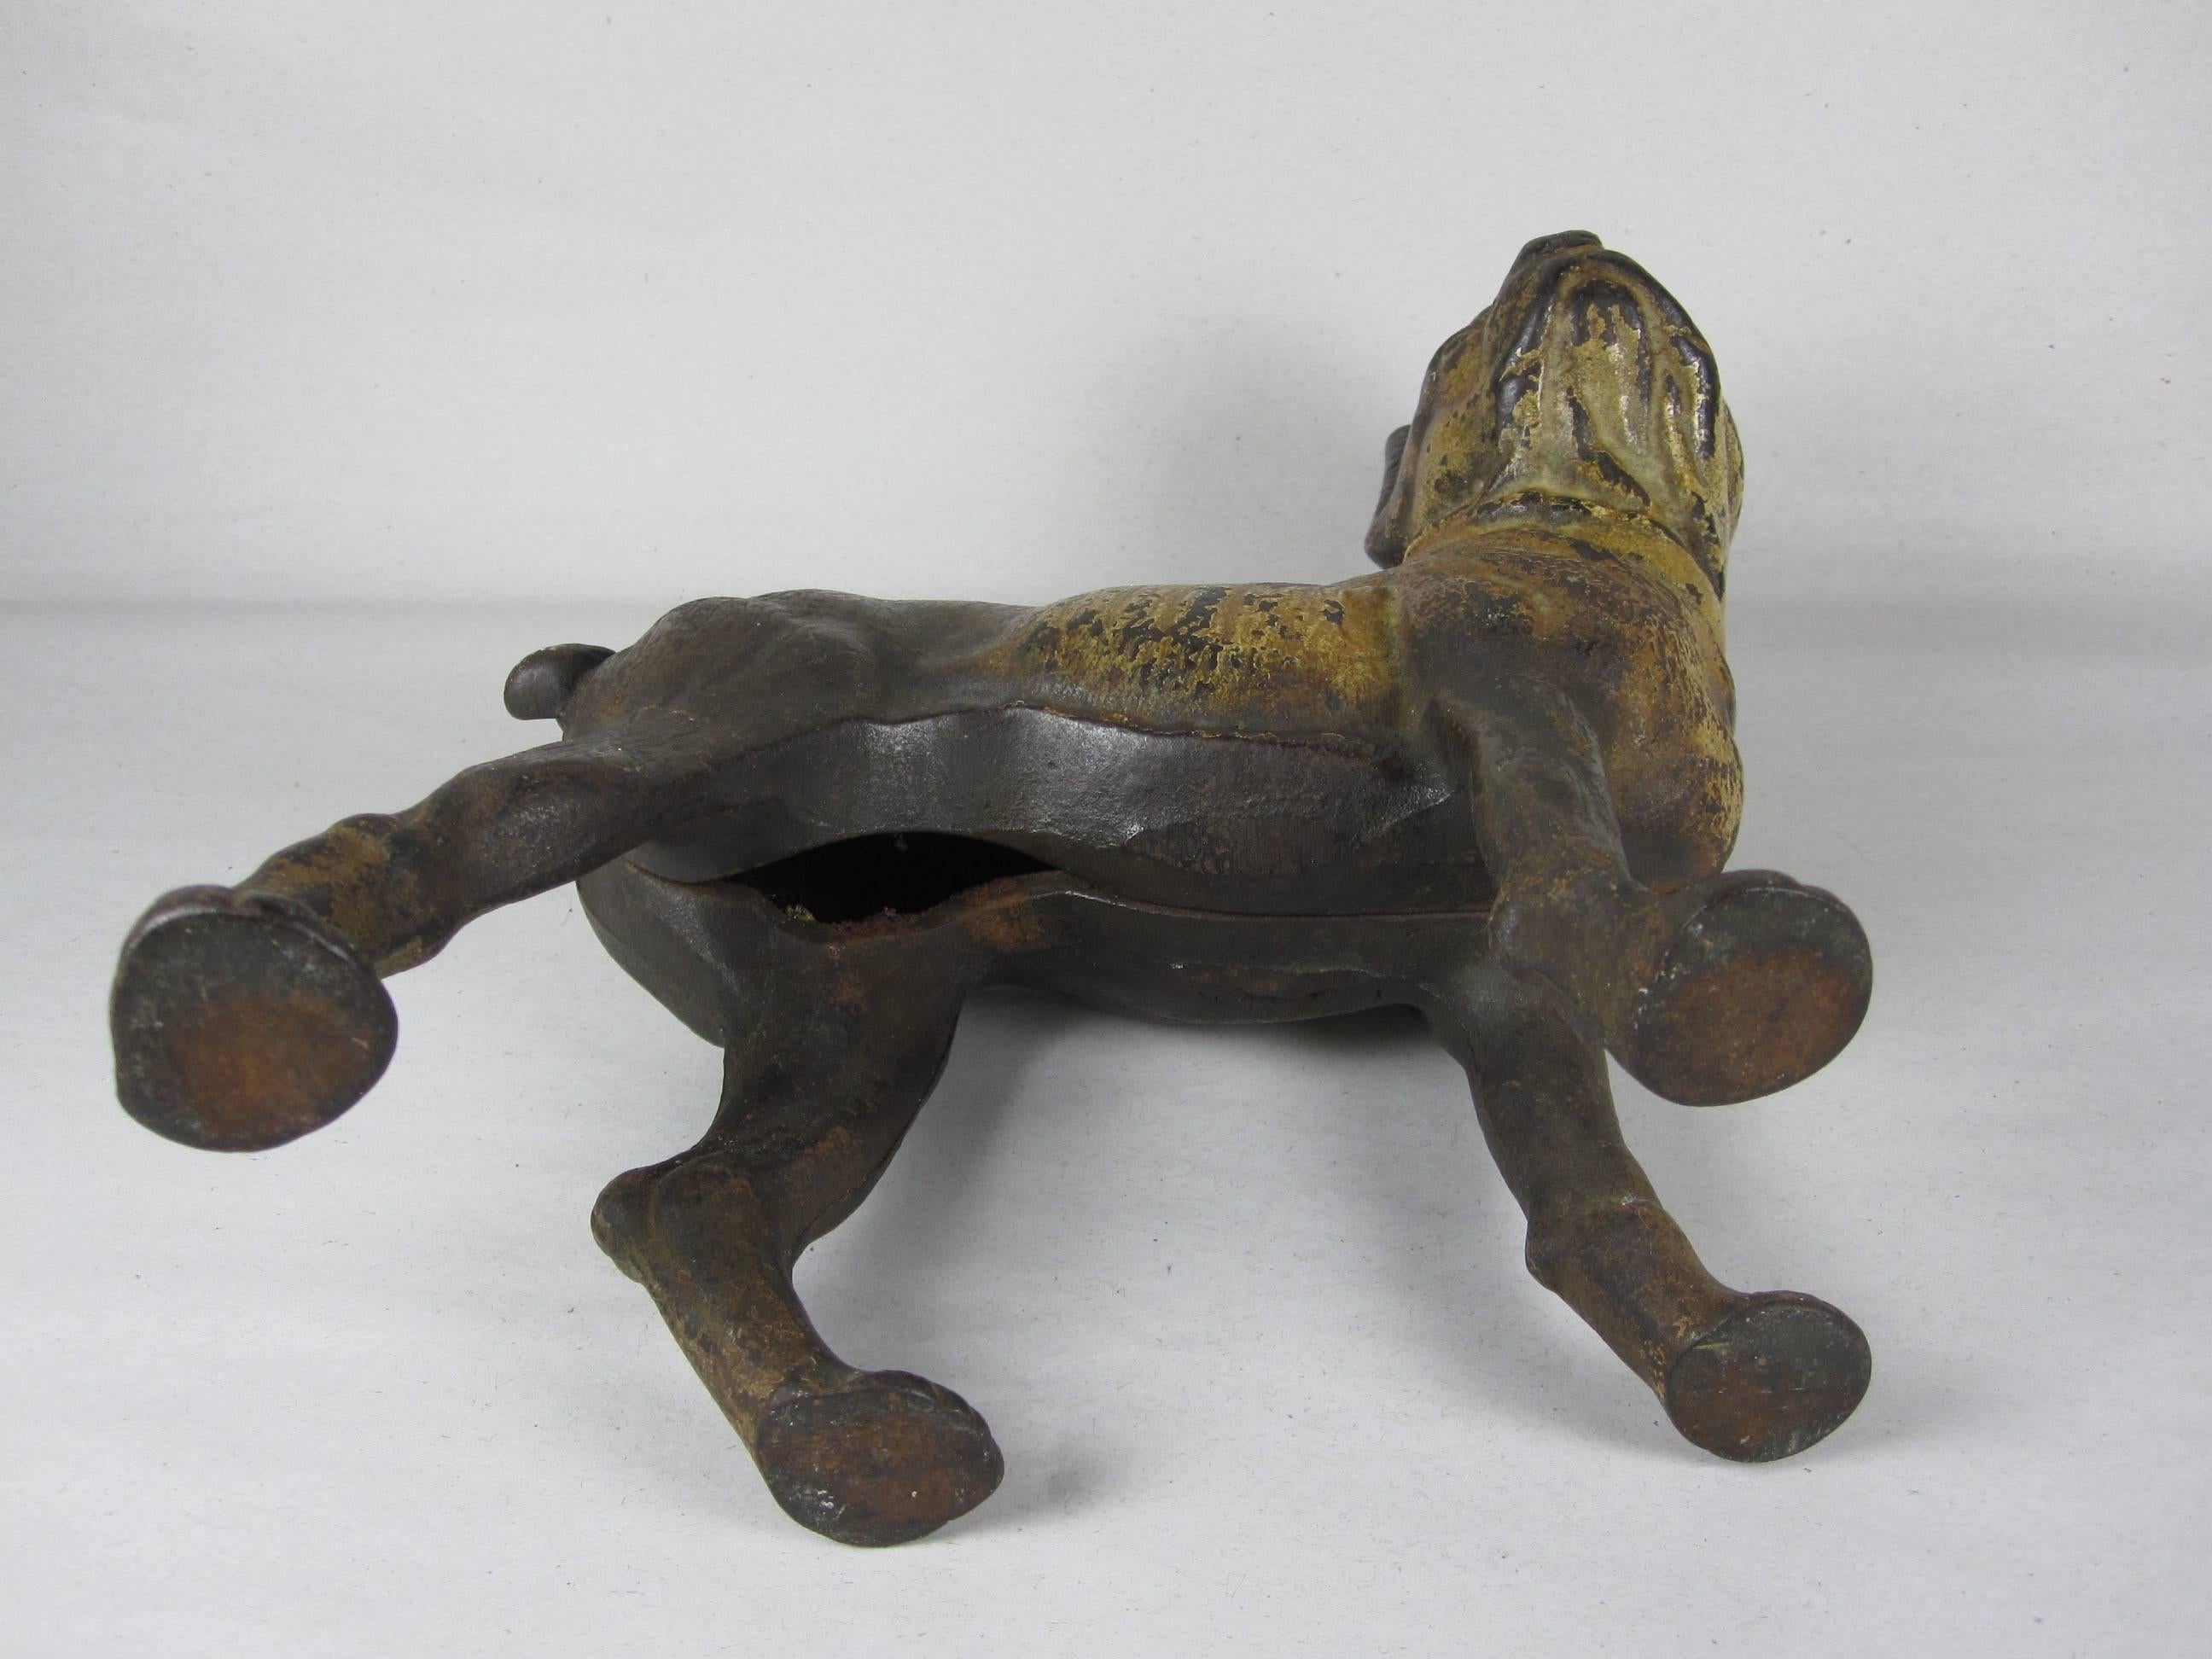 20th Century Antique Hubley Cast Iron French Bulldog Doorstop with Original Painted Finish